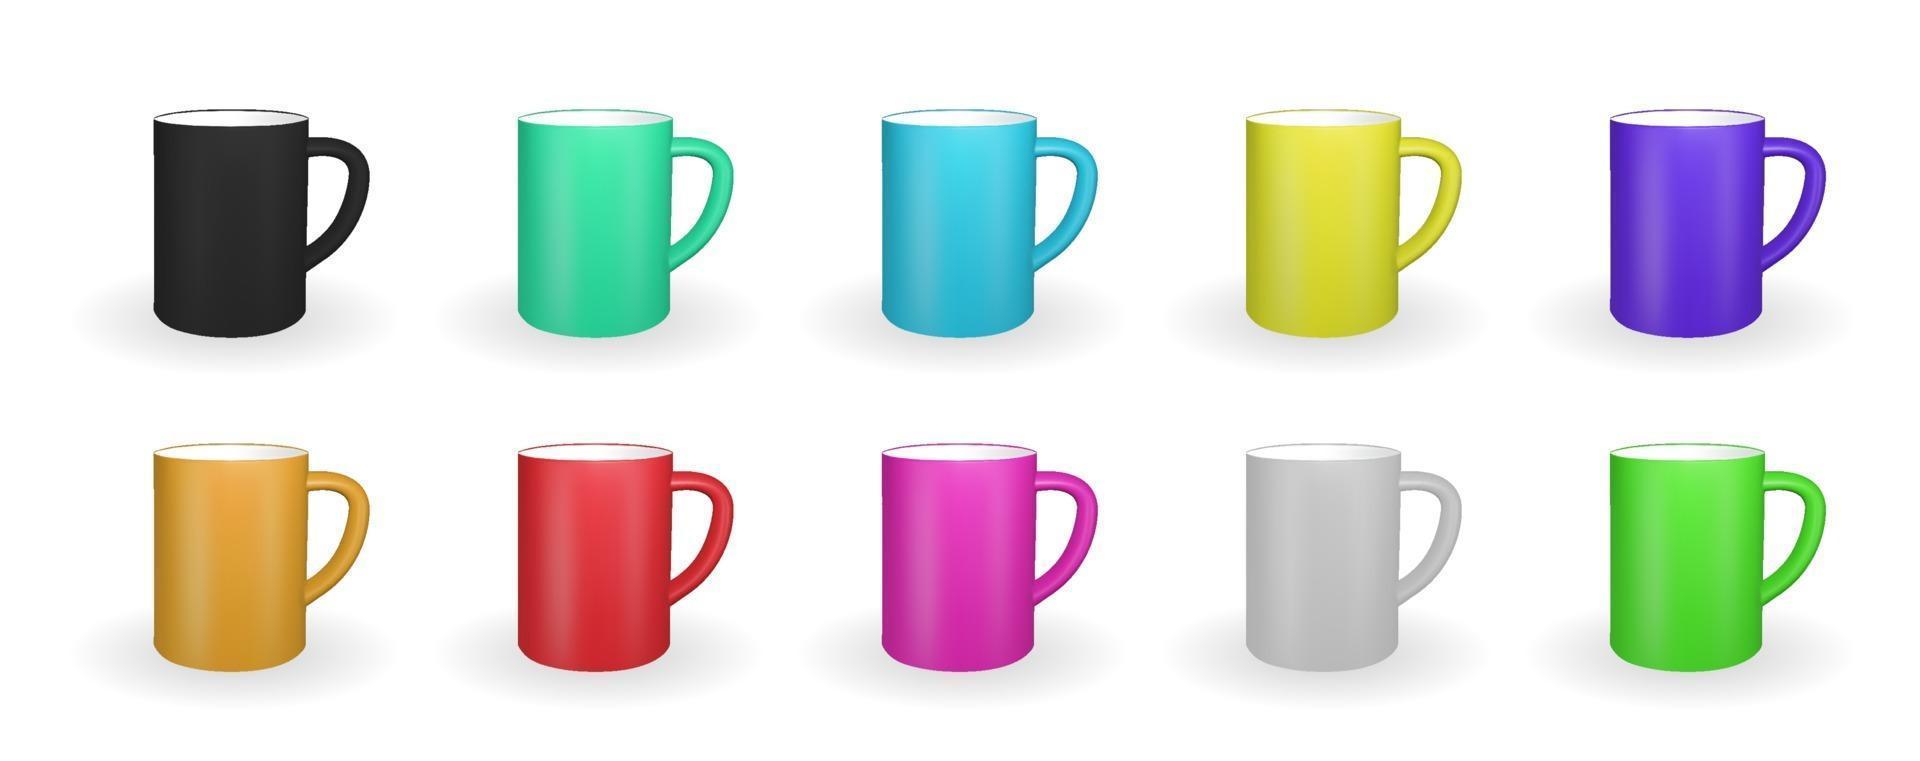 Realistic red mug on a white background. 3D rendering. Vector Illustration